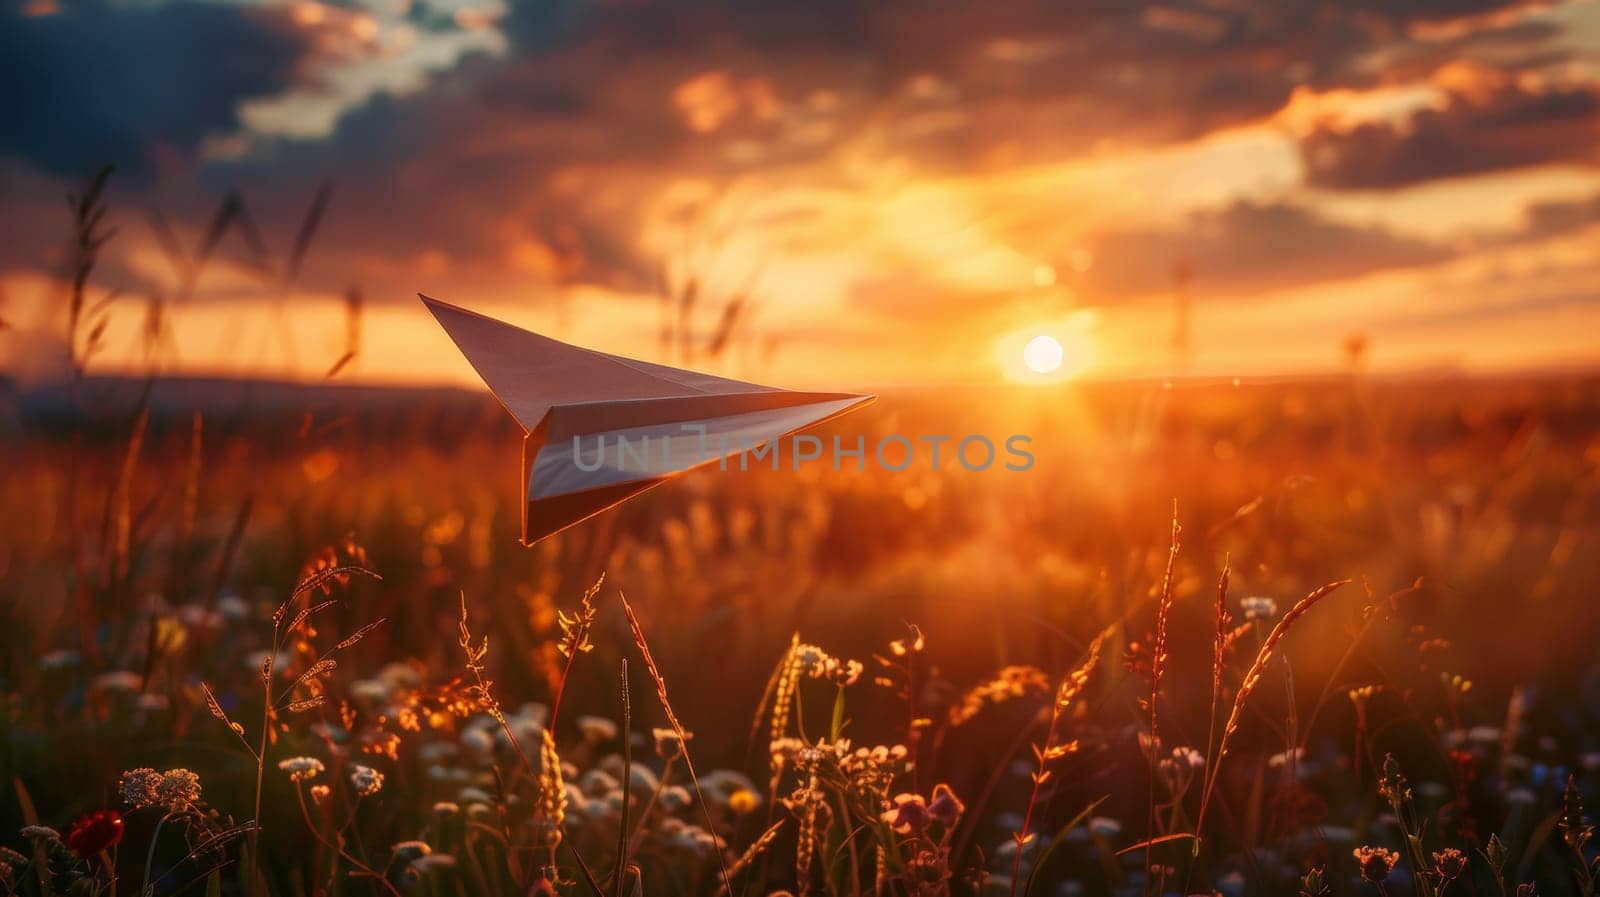 A paper airplane flying through a field of flowers at sunset